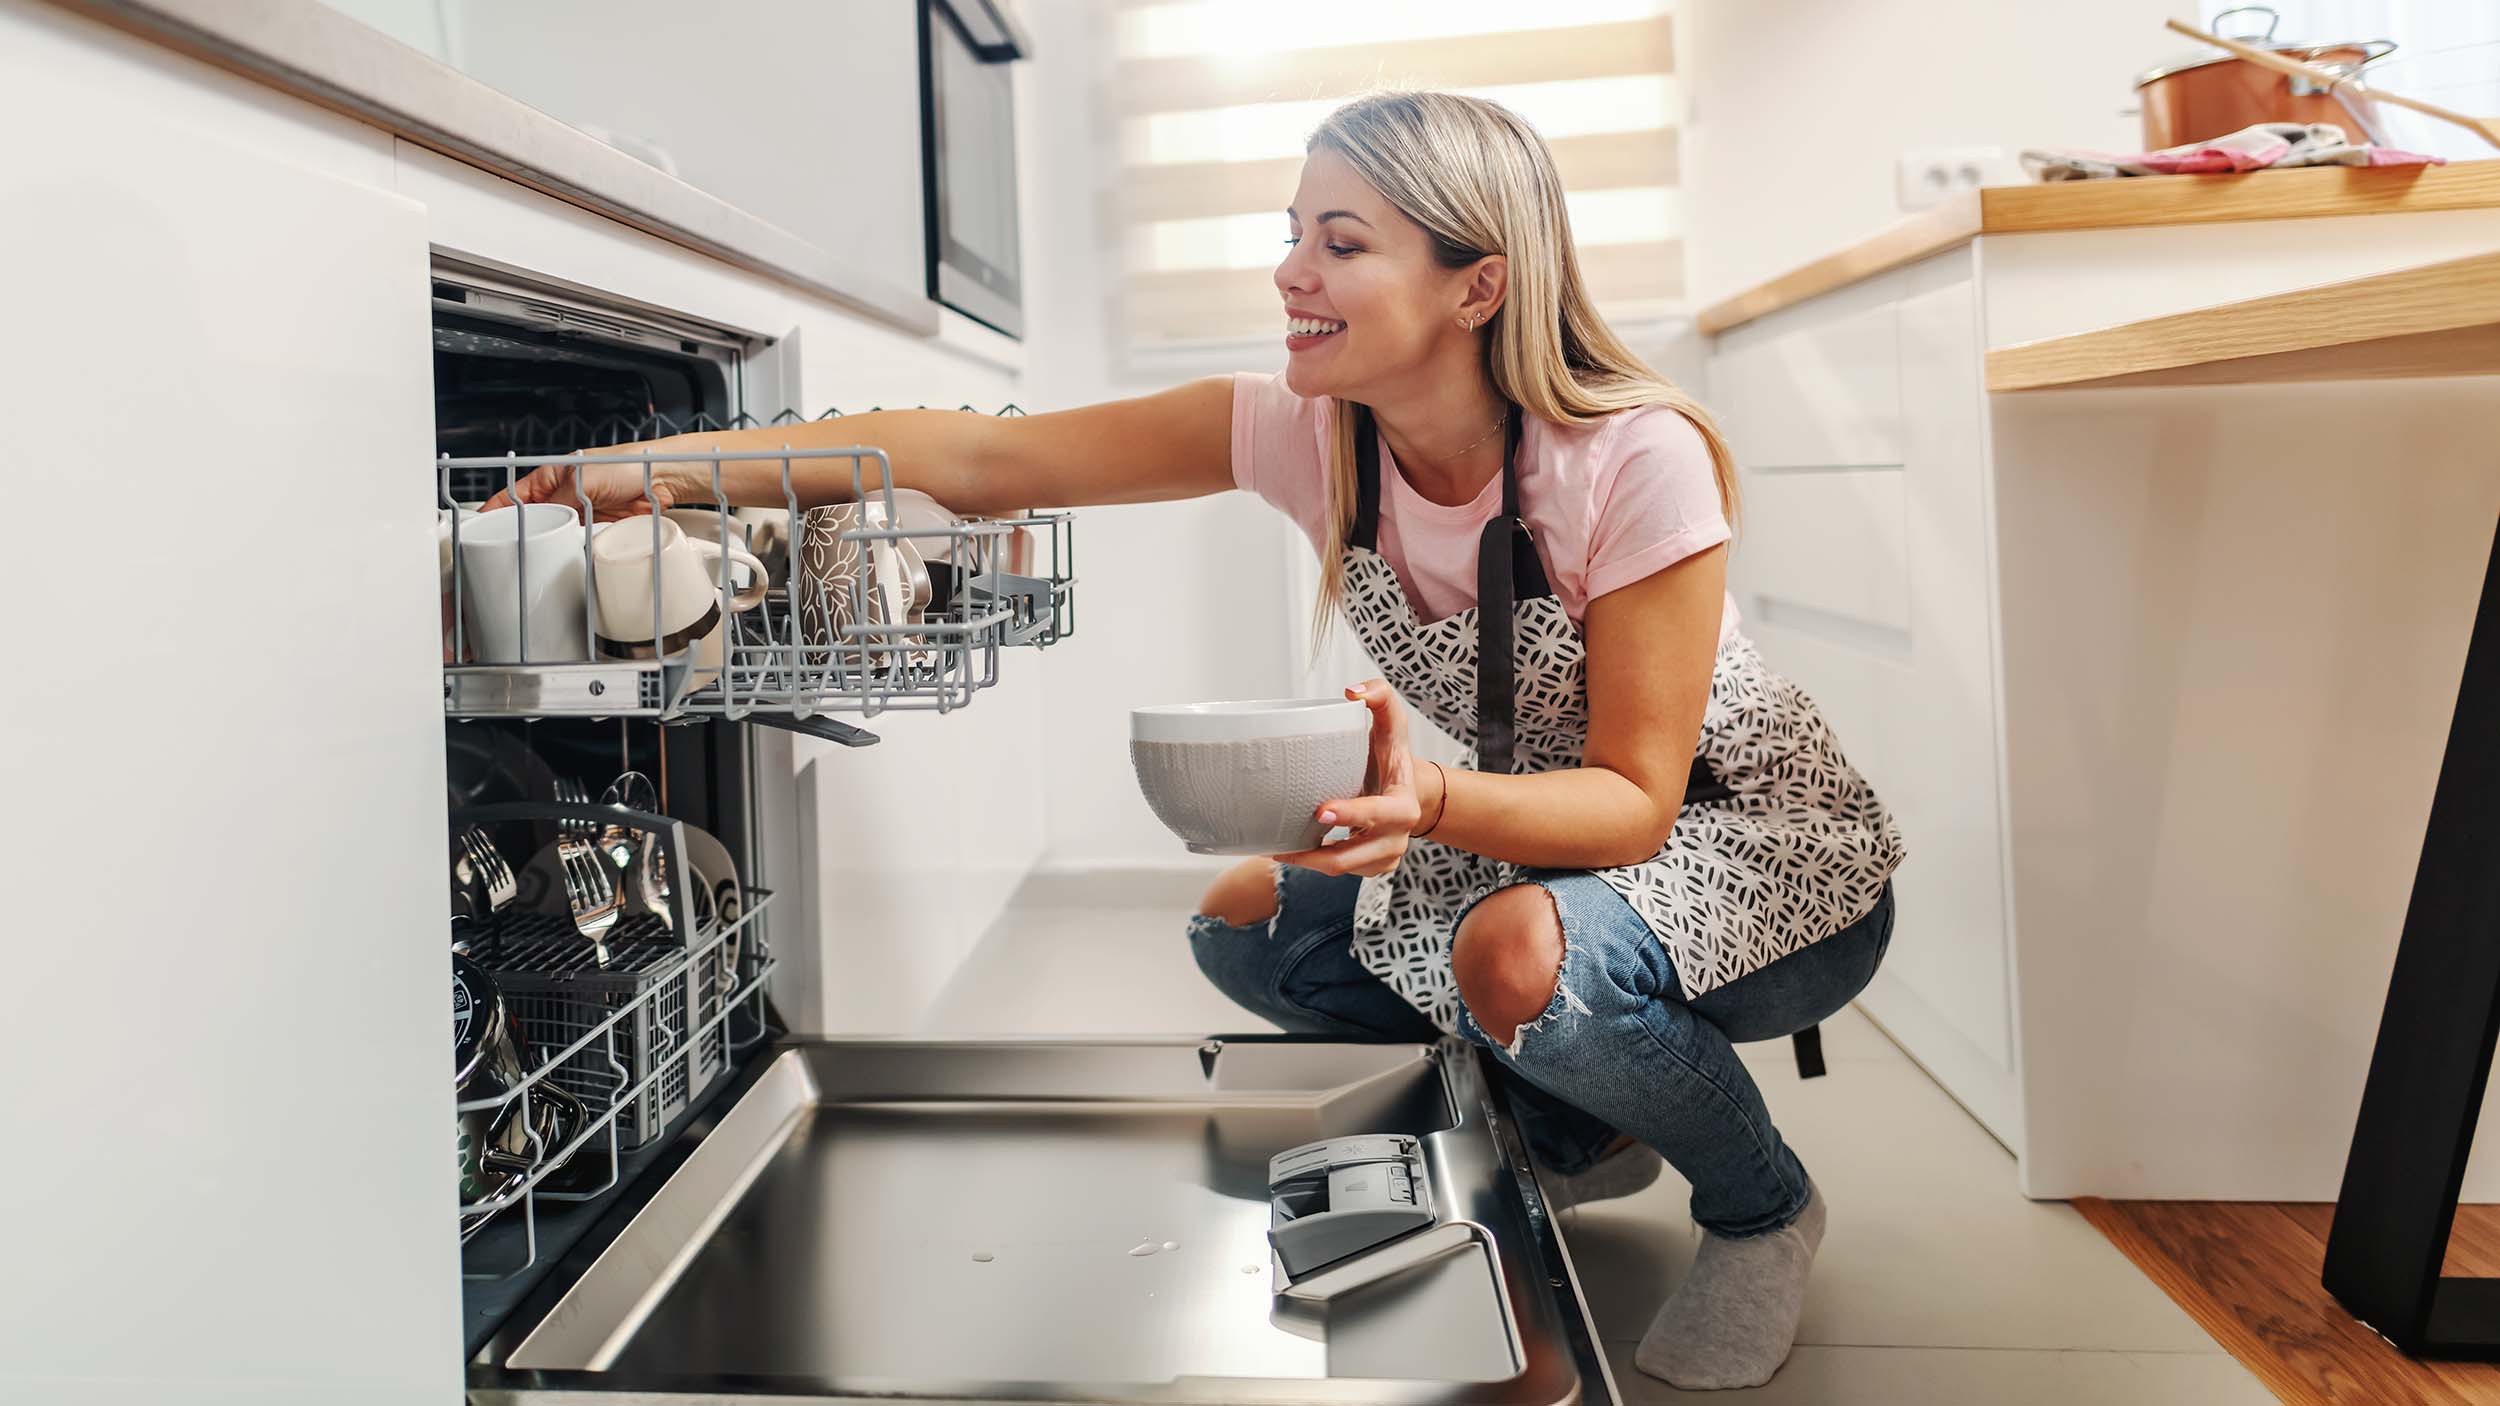 How to Clean a Dishwasher the Right Way